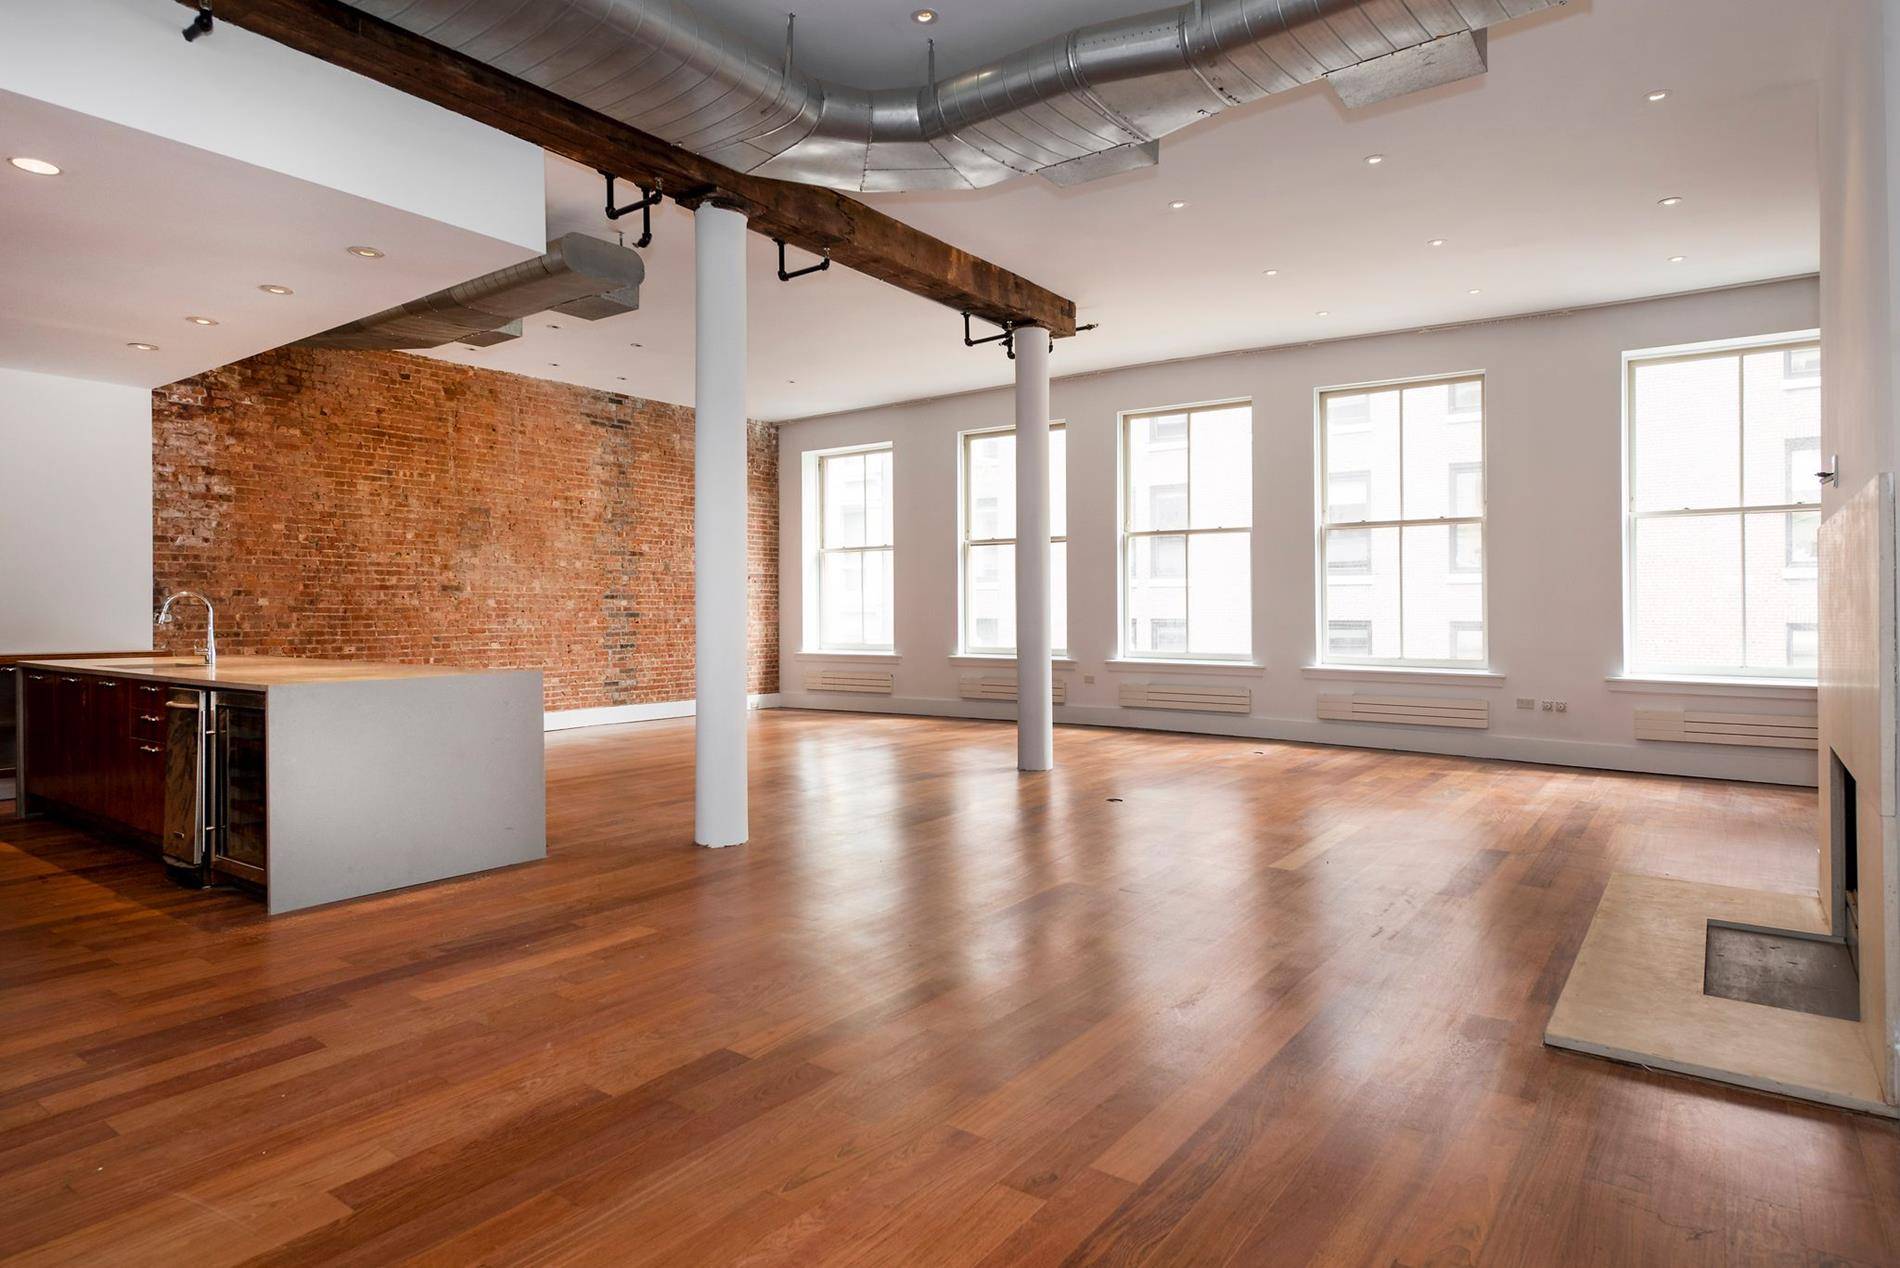 This is a must see 3 bedroom, 3 bathroom loft in one of Soho's most coveted doorman buildings.